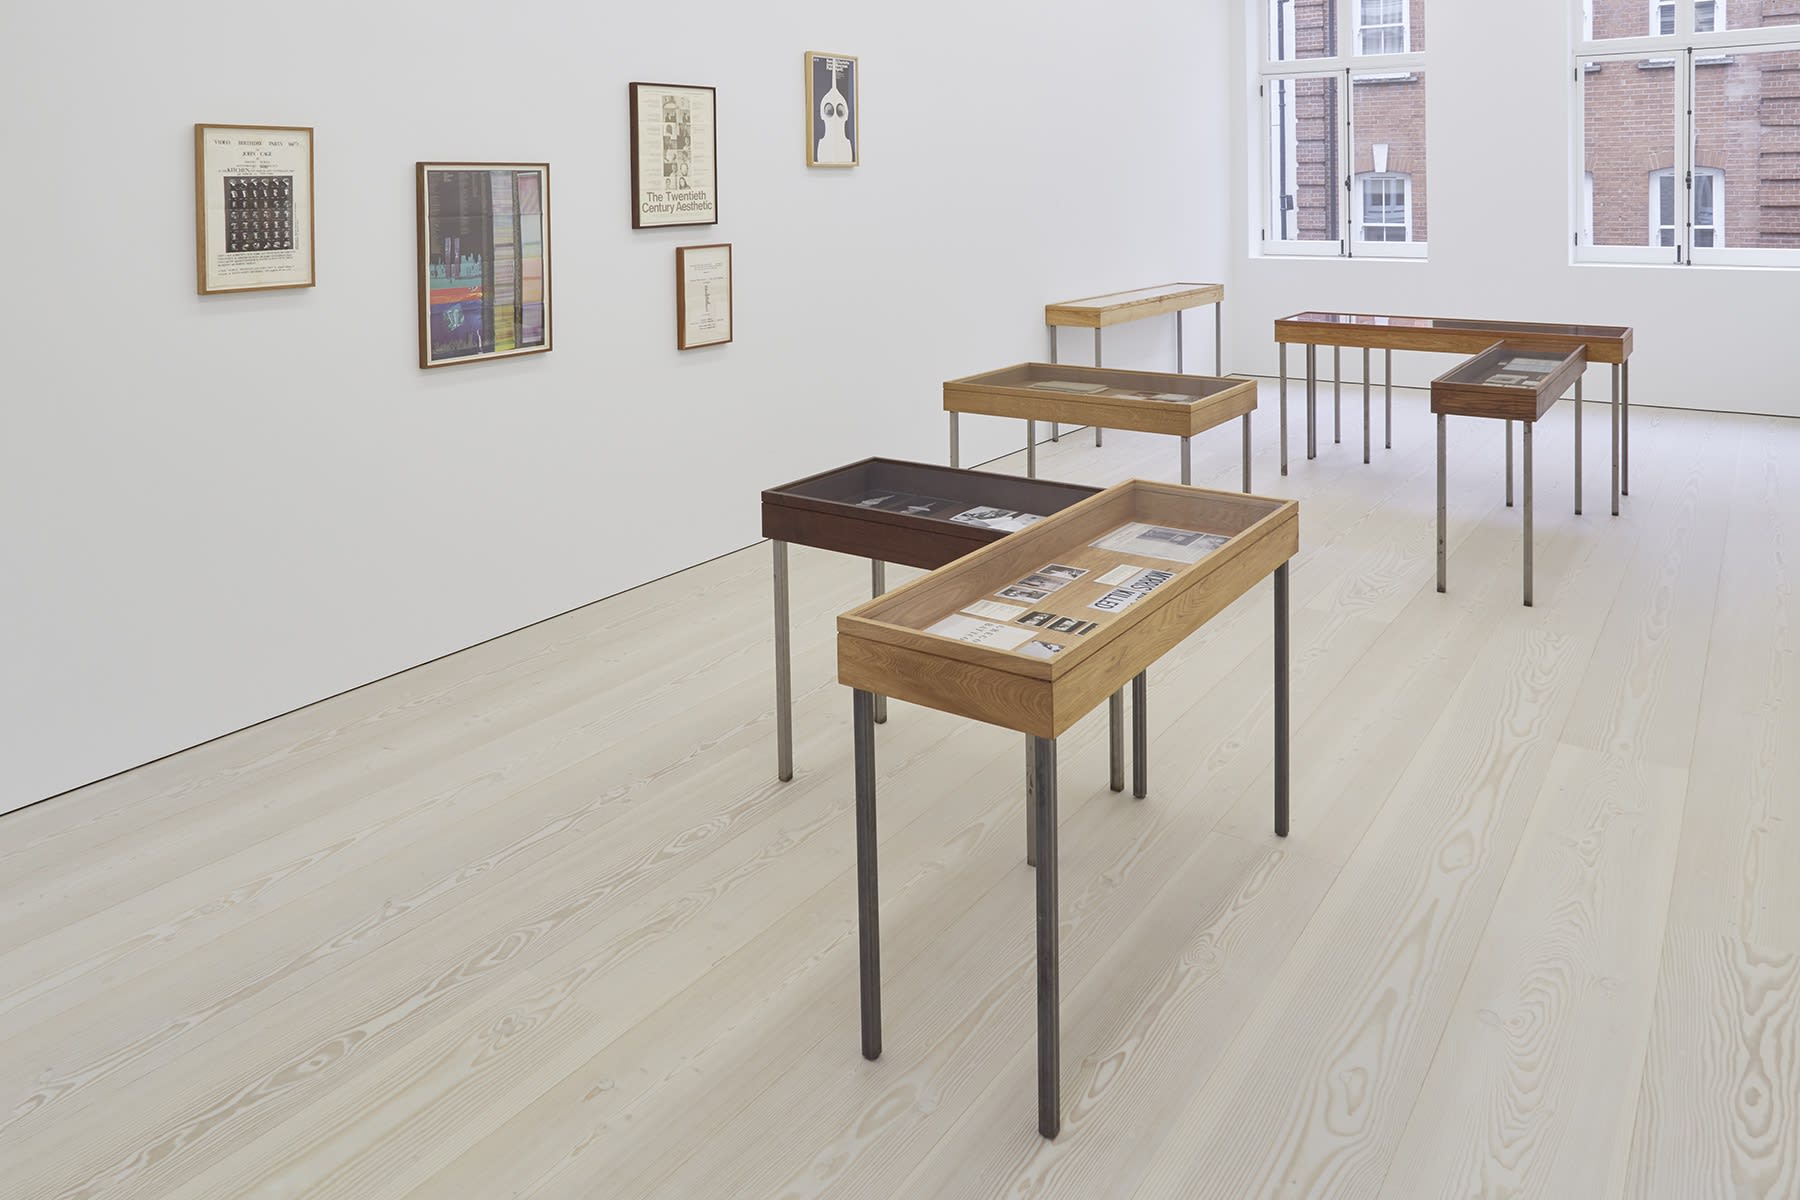 In a white space with light wood floors, several tables with glass tops act as display cases for various drawn works. Both colorful and black and white paintings and prints hang from the walls.